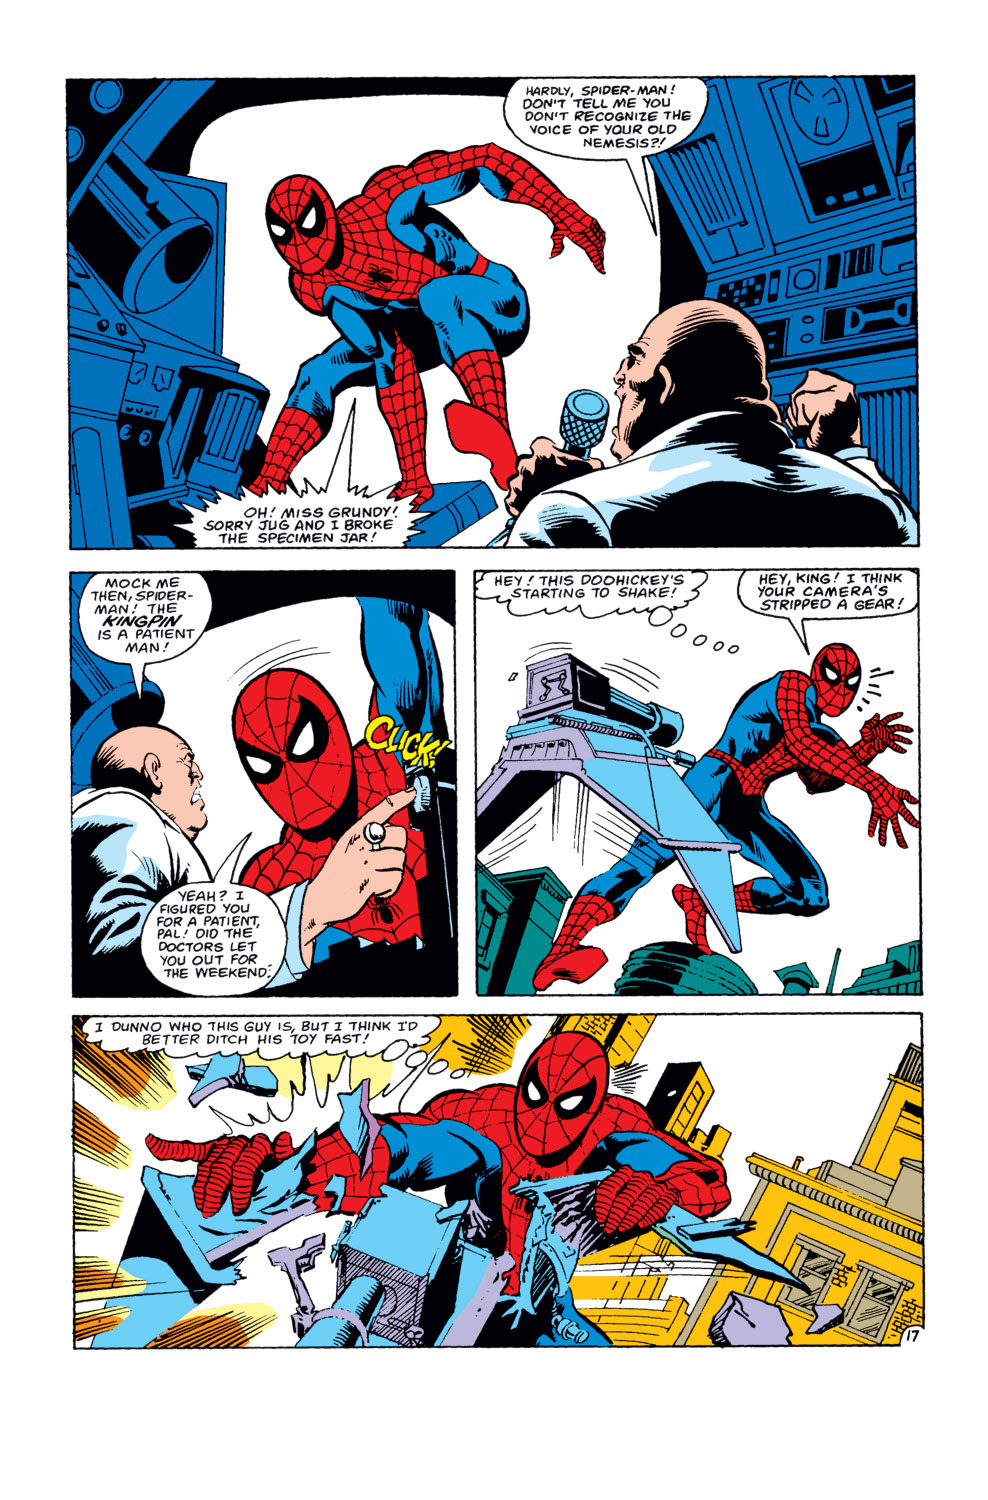 What If? (1977) issue 30 - Spider-Man's clone lived - Page 18